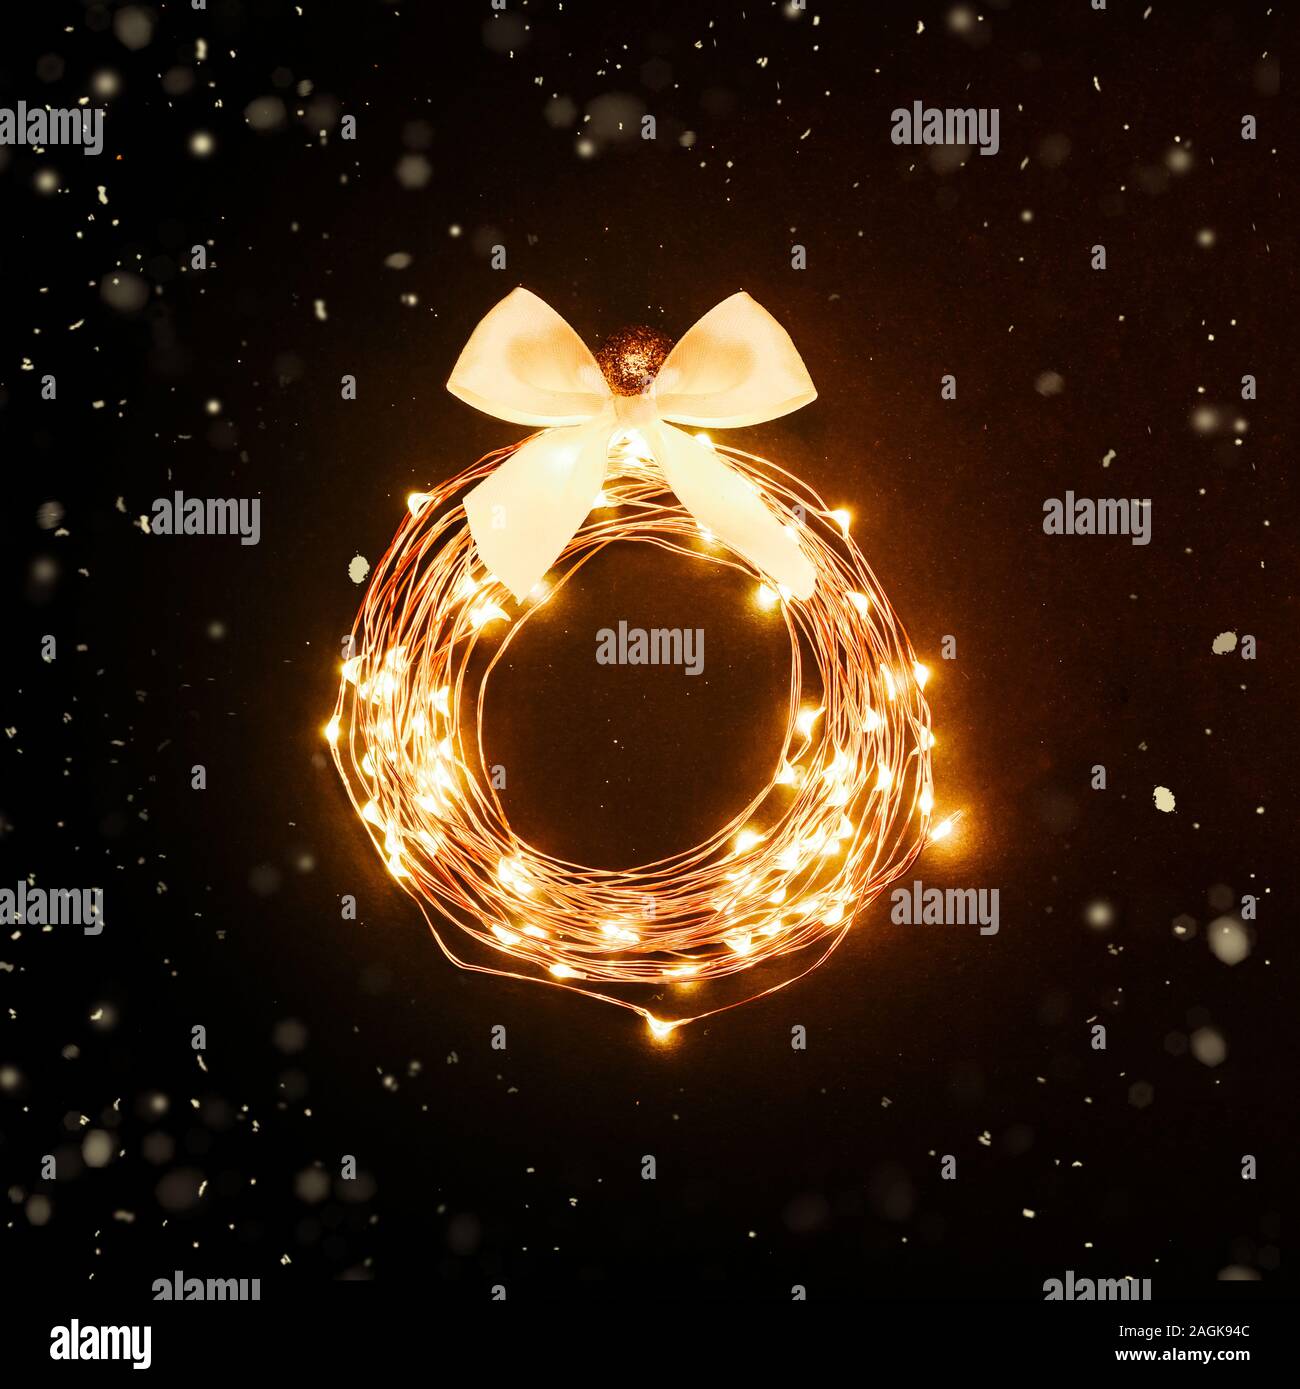 Christmas background. Glowing circle from a garland in black background with glitters. Festive design concept Stock Photo